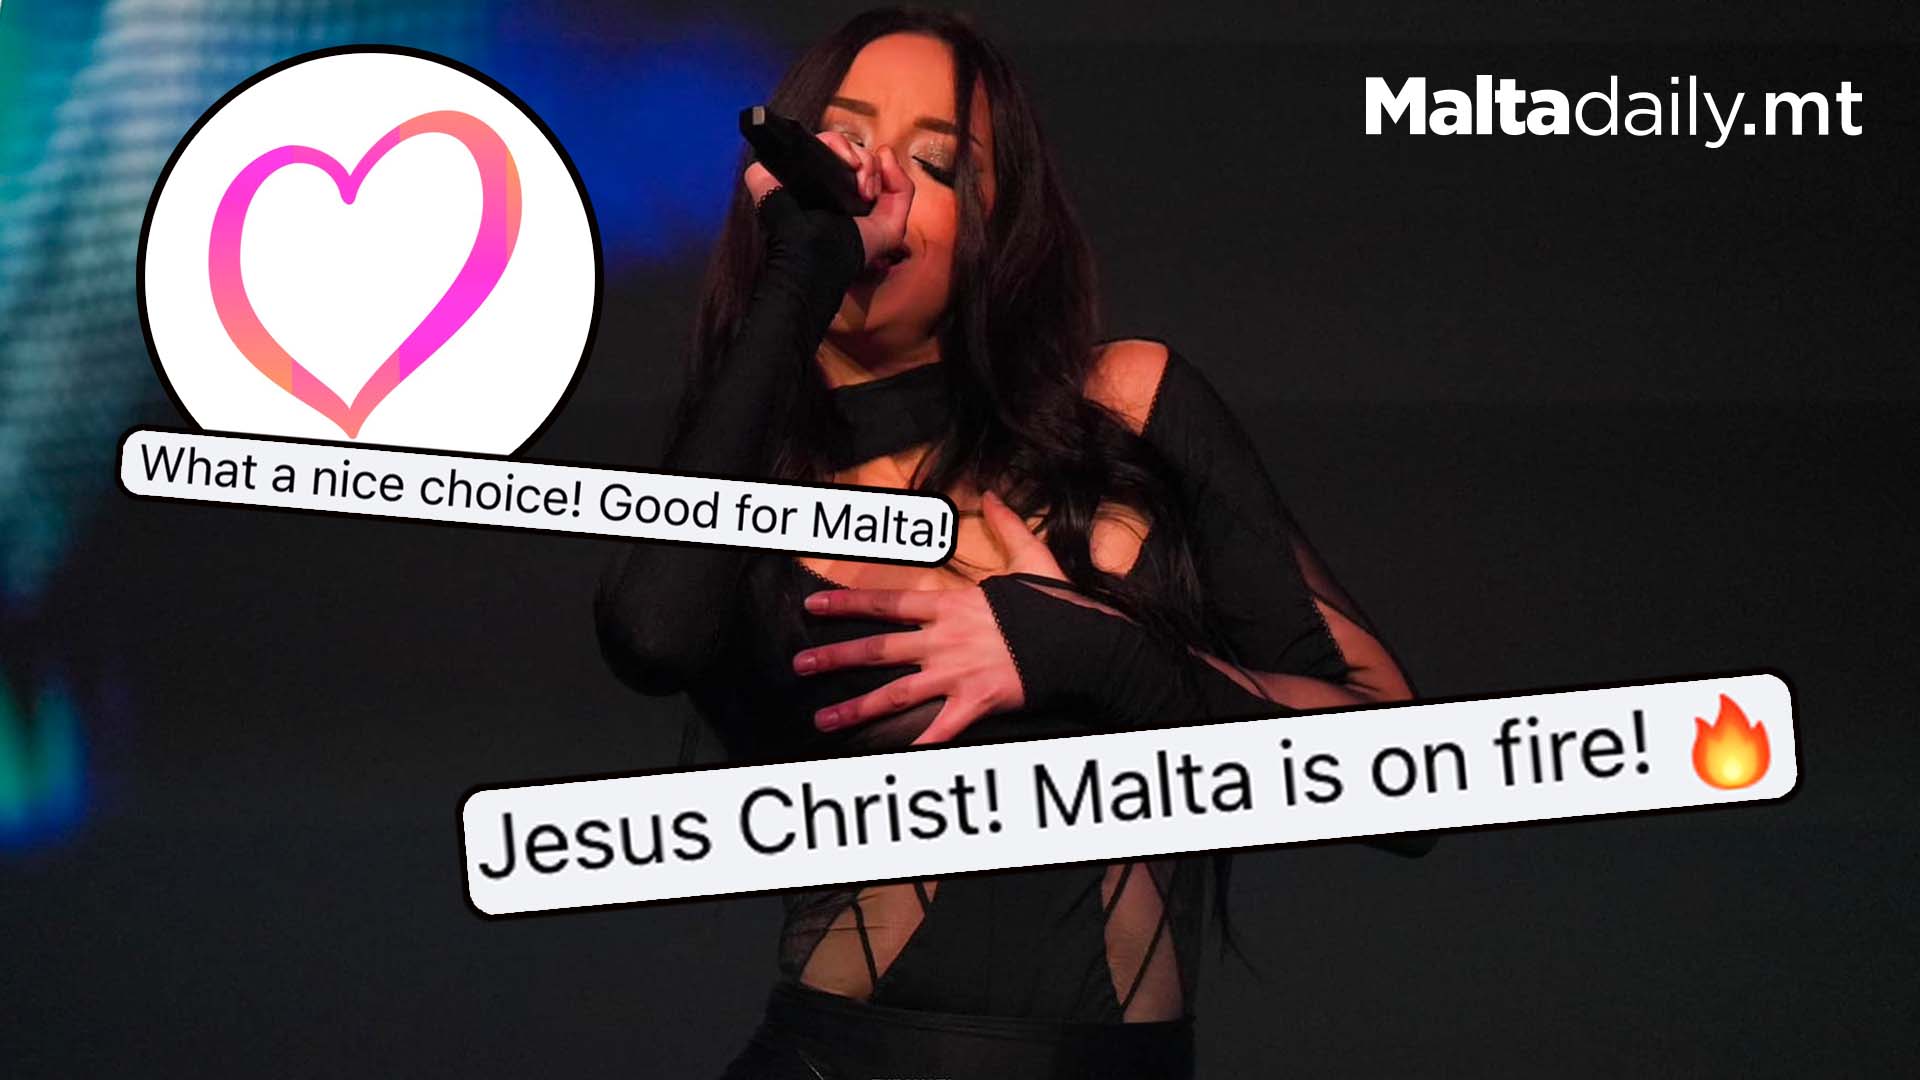 First Reactions To Malta’s Eurovision Song Winner ‘Loop’